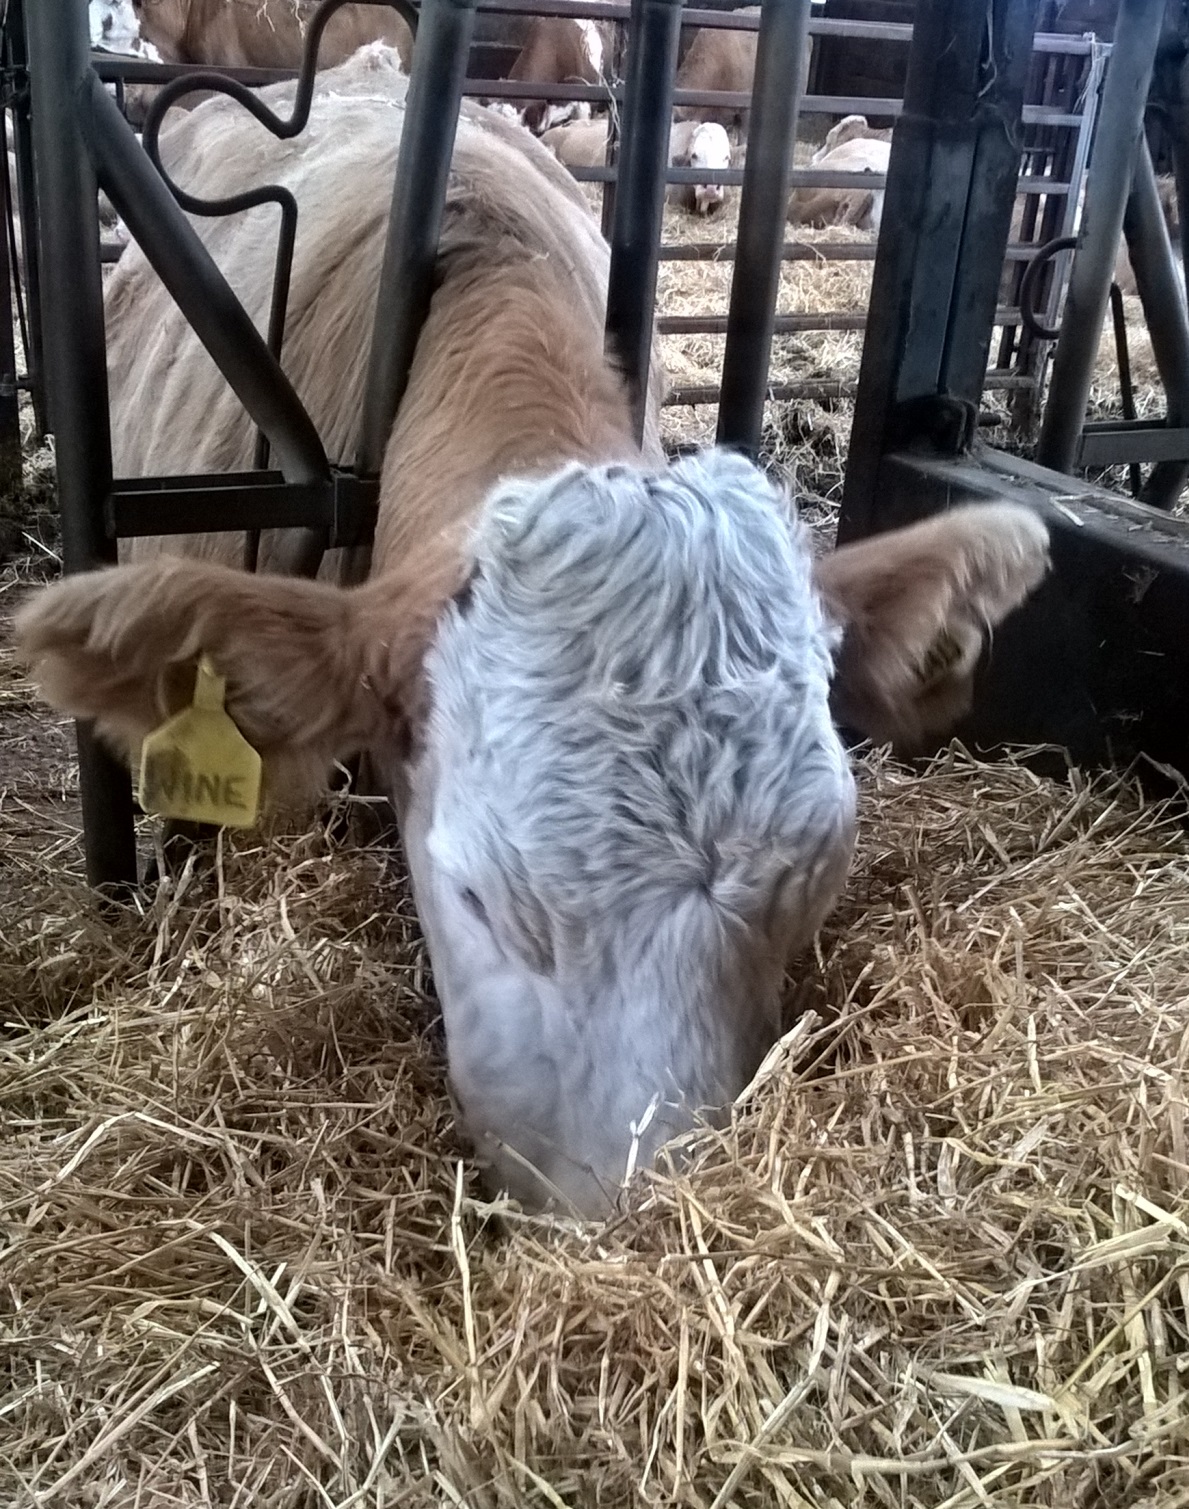 https://www.fas.scot/wp-content/uploads/2019/01/Cow-eatiing-straw-resized.jpg